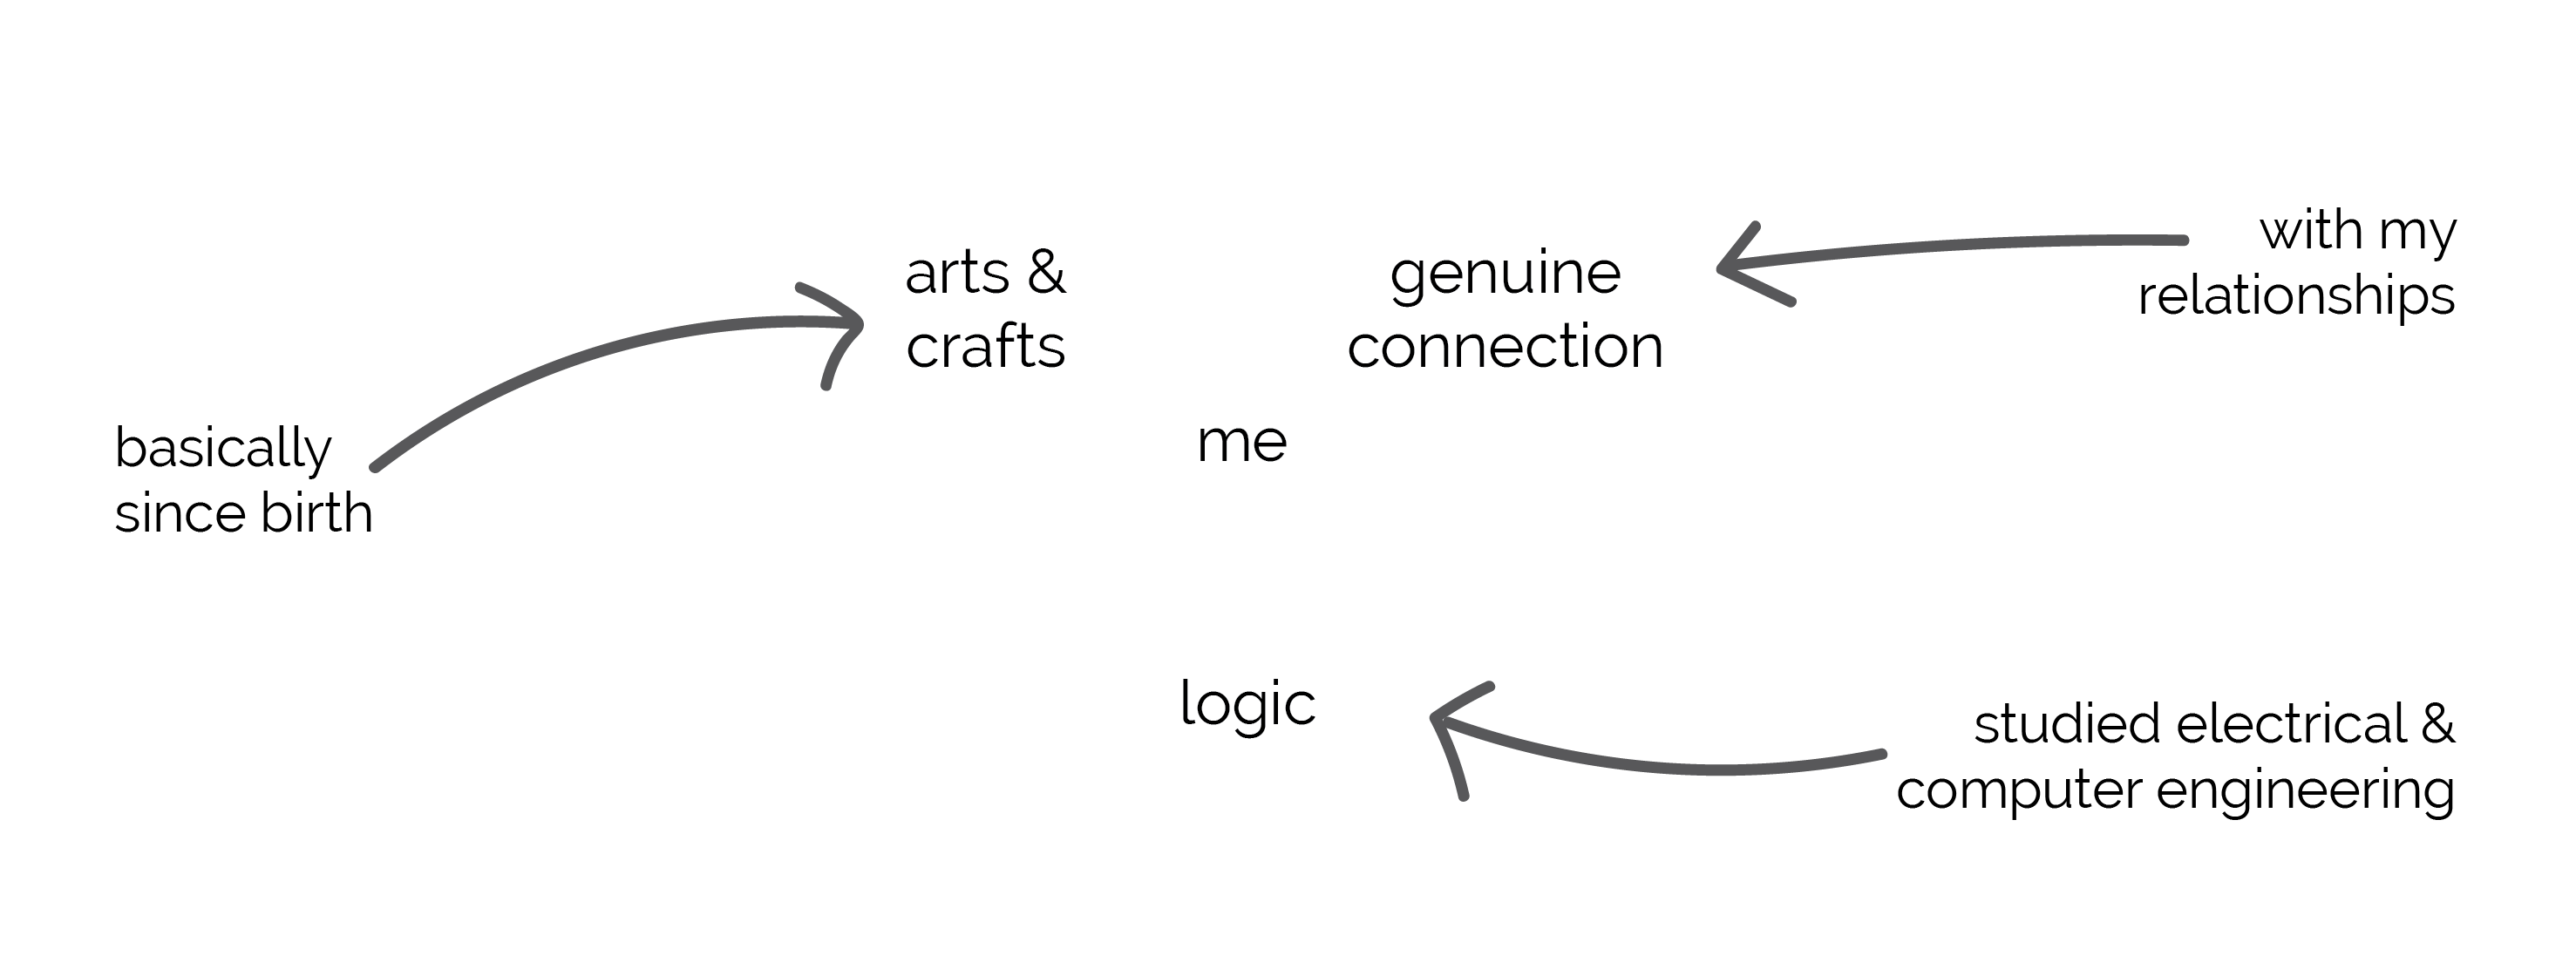 vendiagram showcasing me as the intersection of logic, genuine connection, and creativity